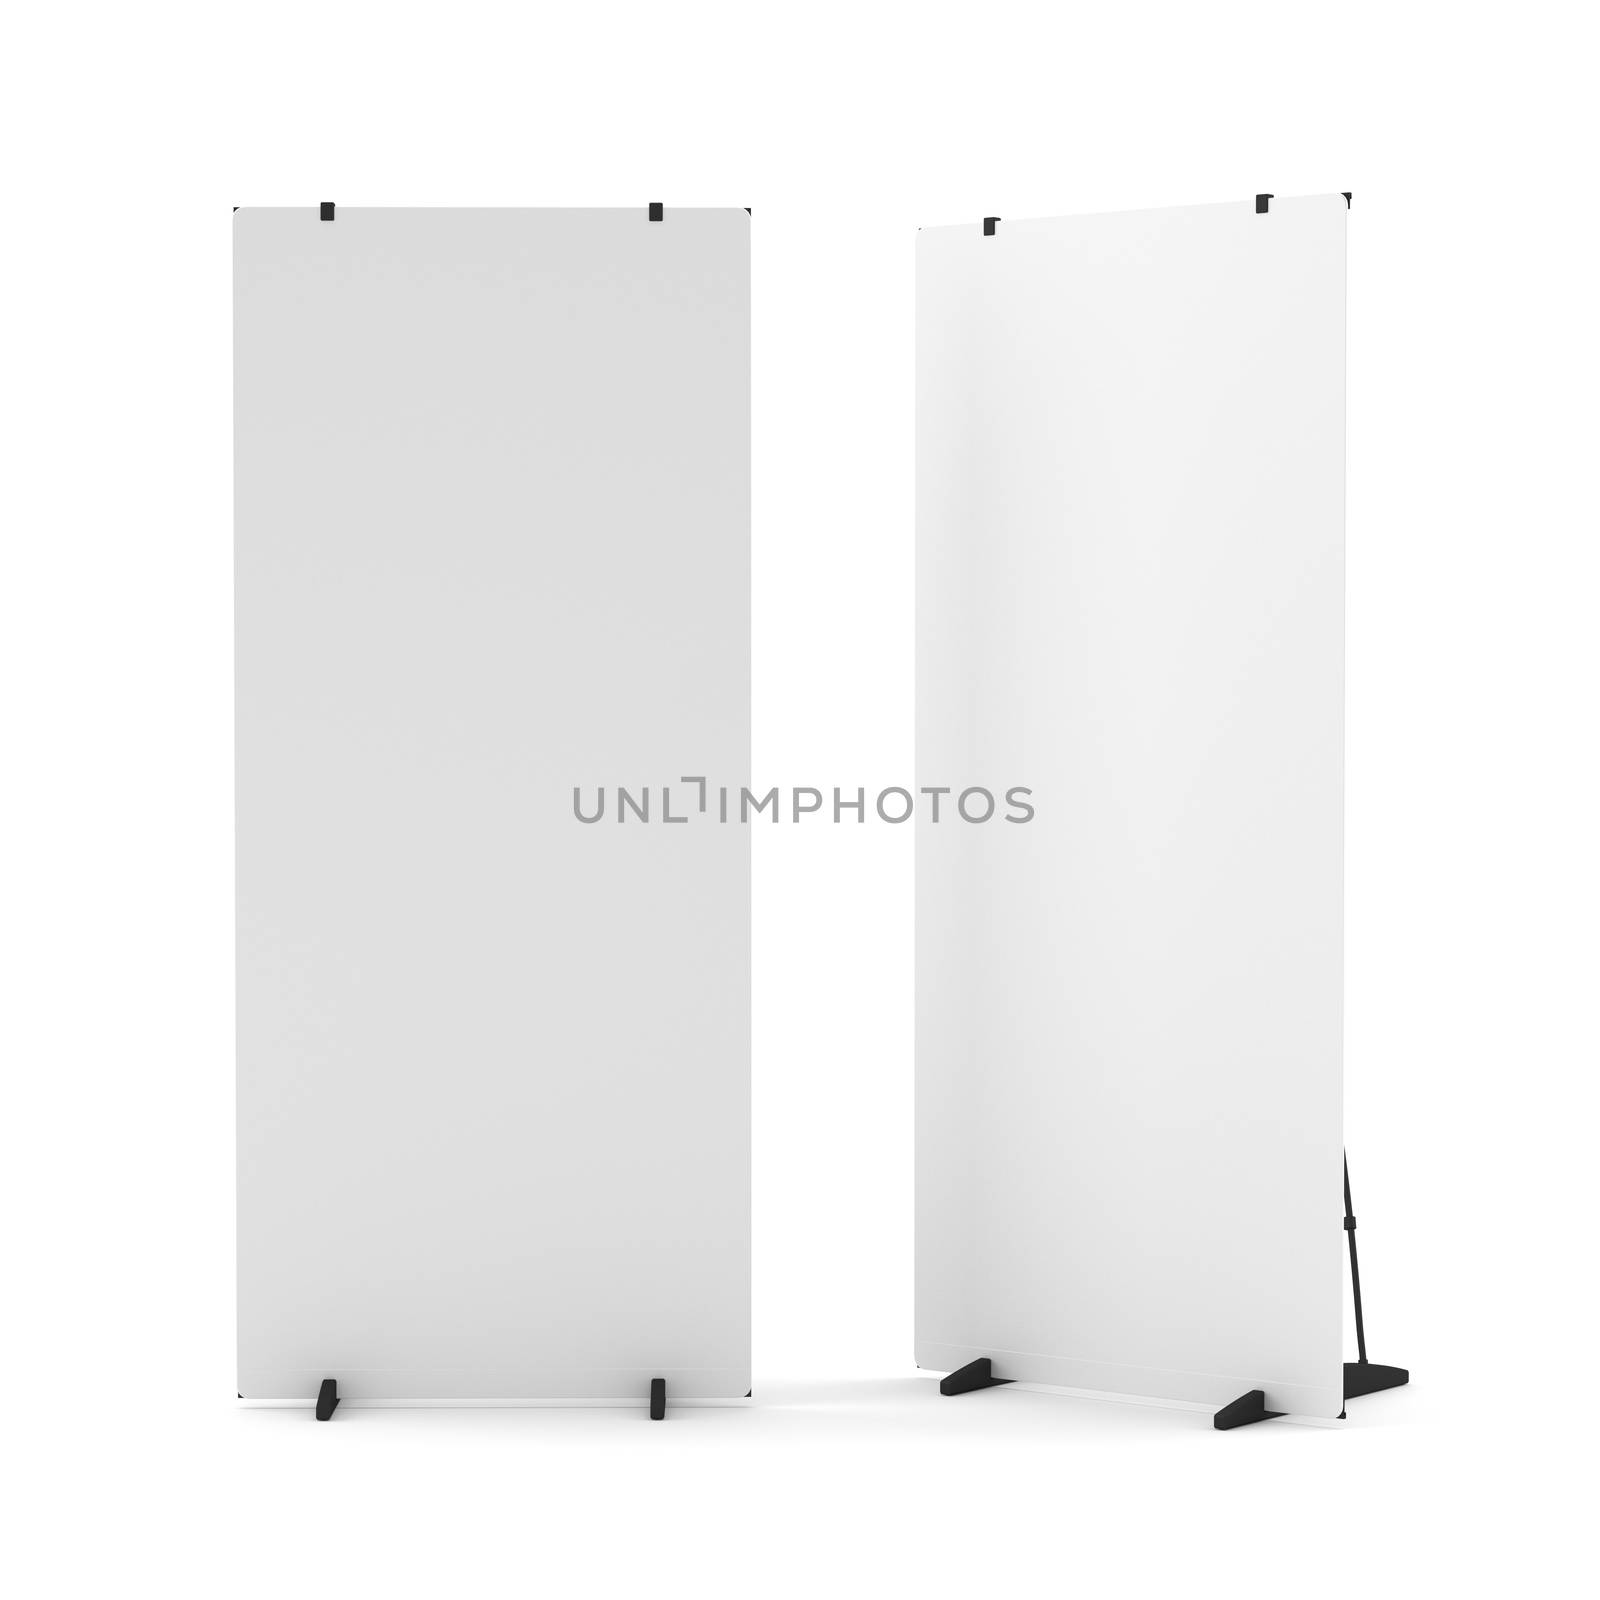 Trade show booth white and blank. Isolated on white background. Template mockup for your design. 3D illustration